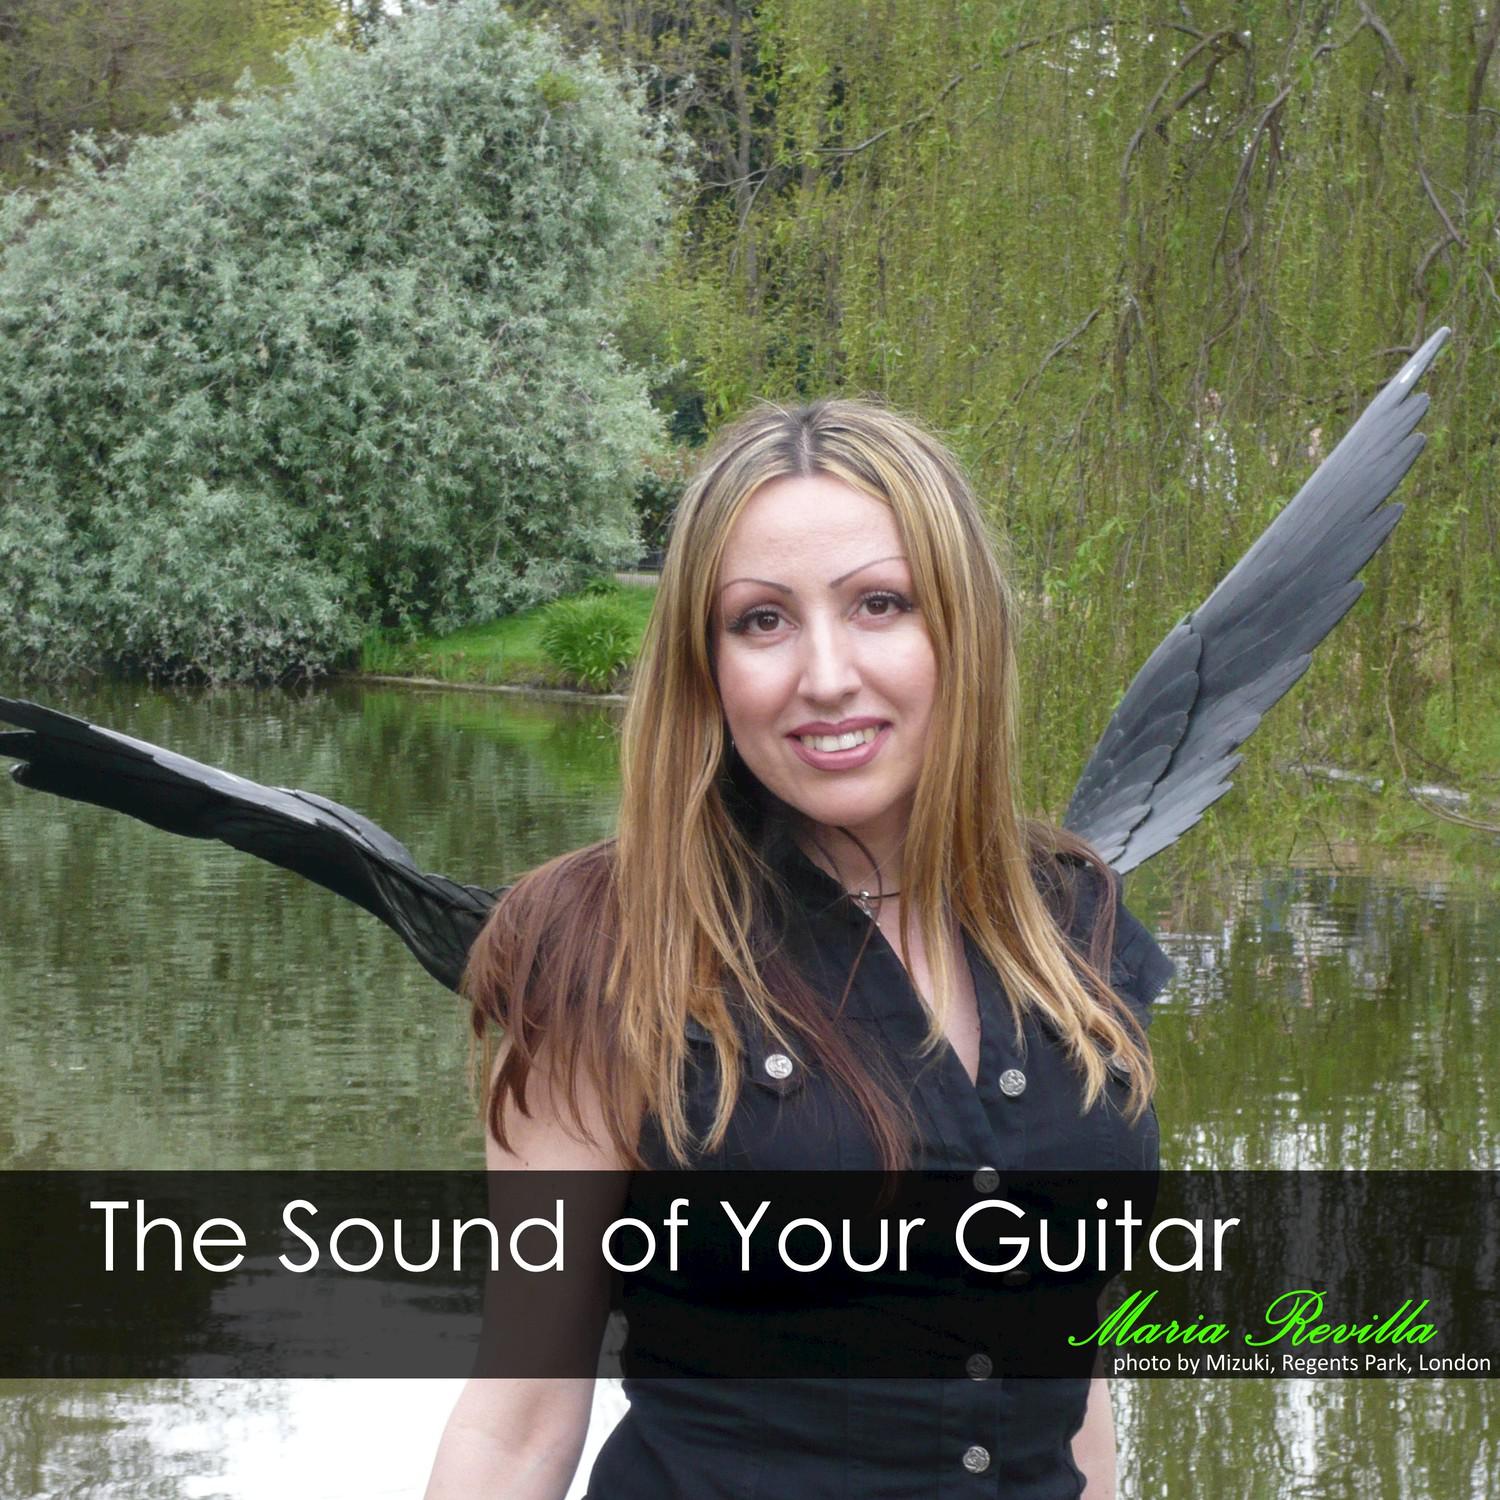 The Sound of Your Guitar